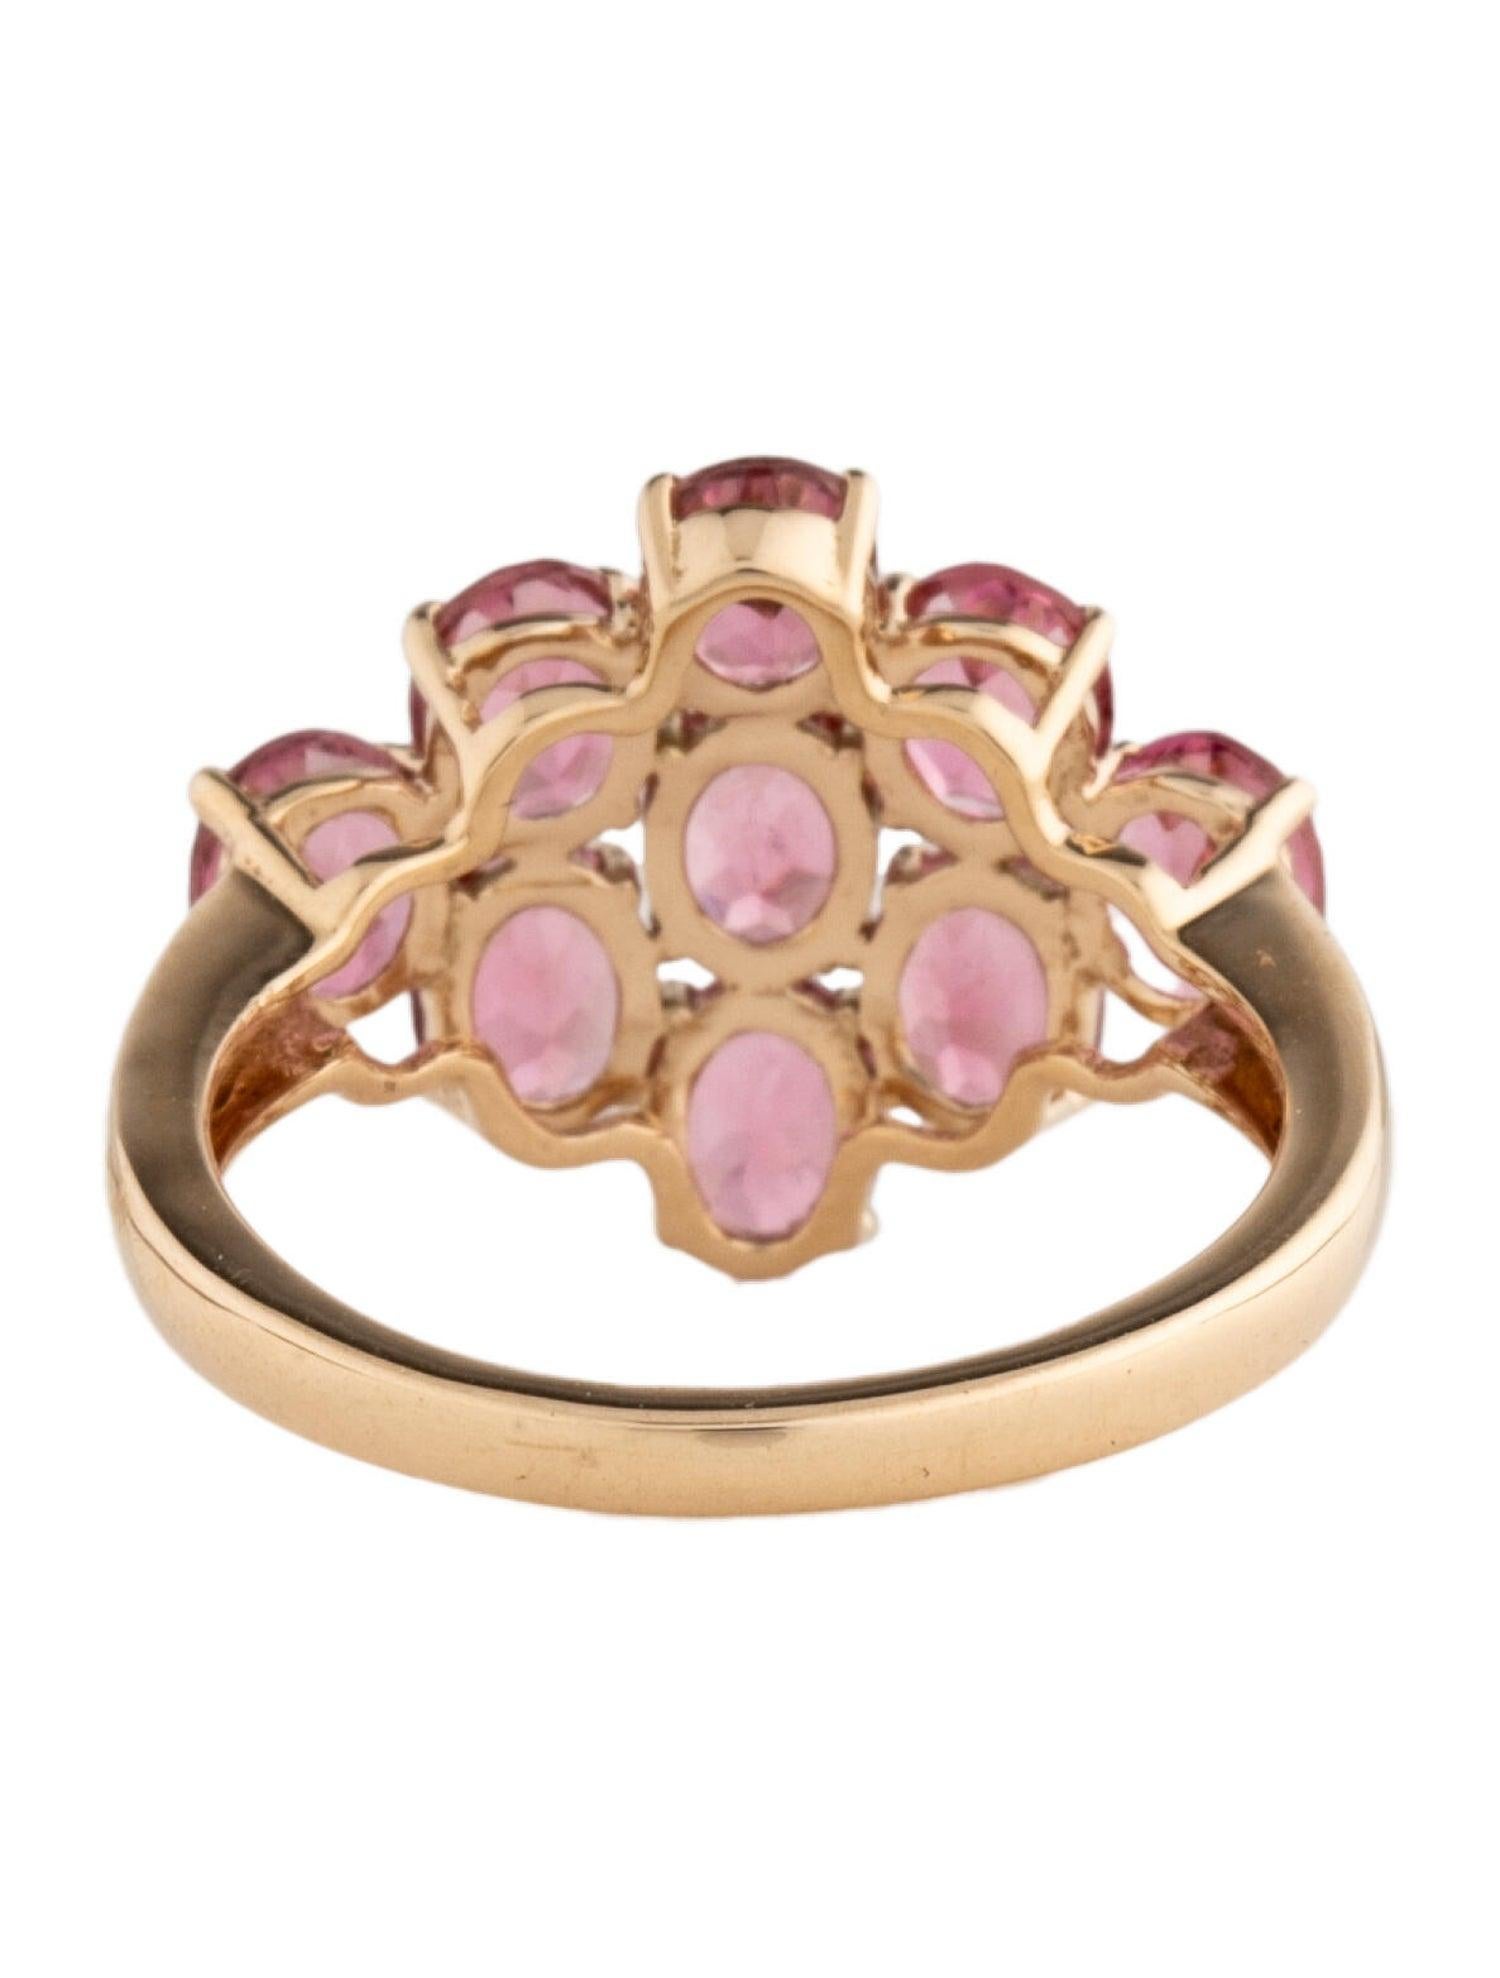 Brilliant Cut Exquisite 14K Tourmaline Cocktail Ring 3.04ctw - Size 6.75 - Timeless Luxury For Sale